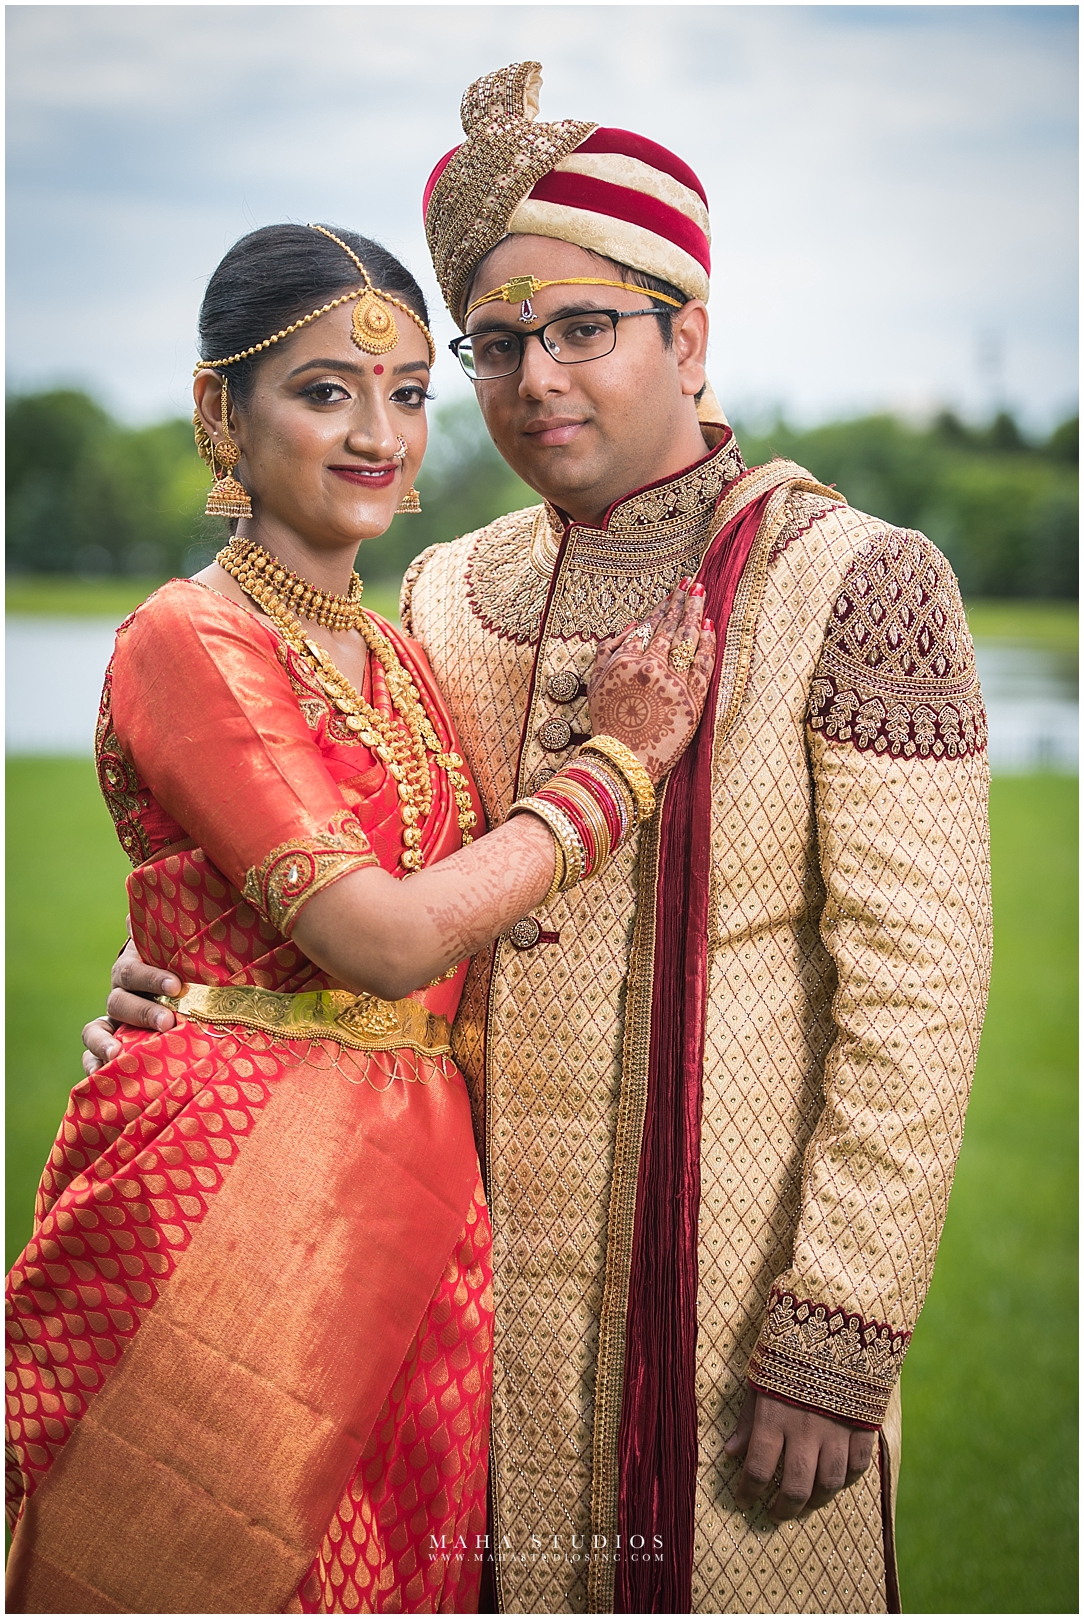 Bride in Traditional South Indian Wedding Saree standing next to Groom